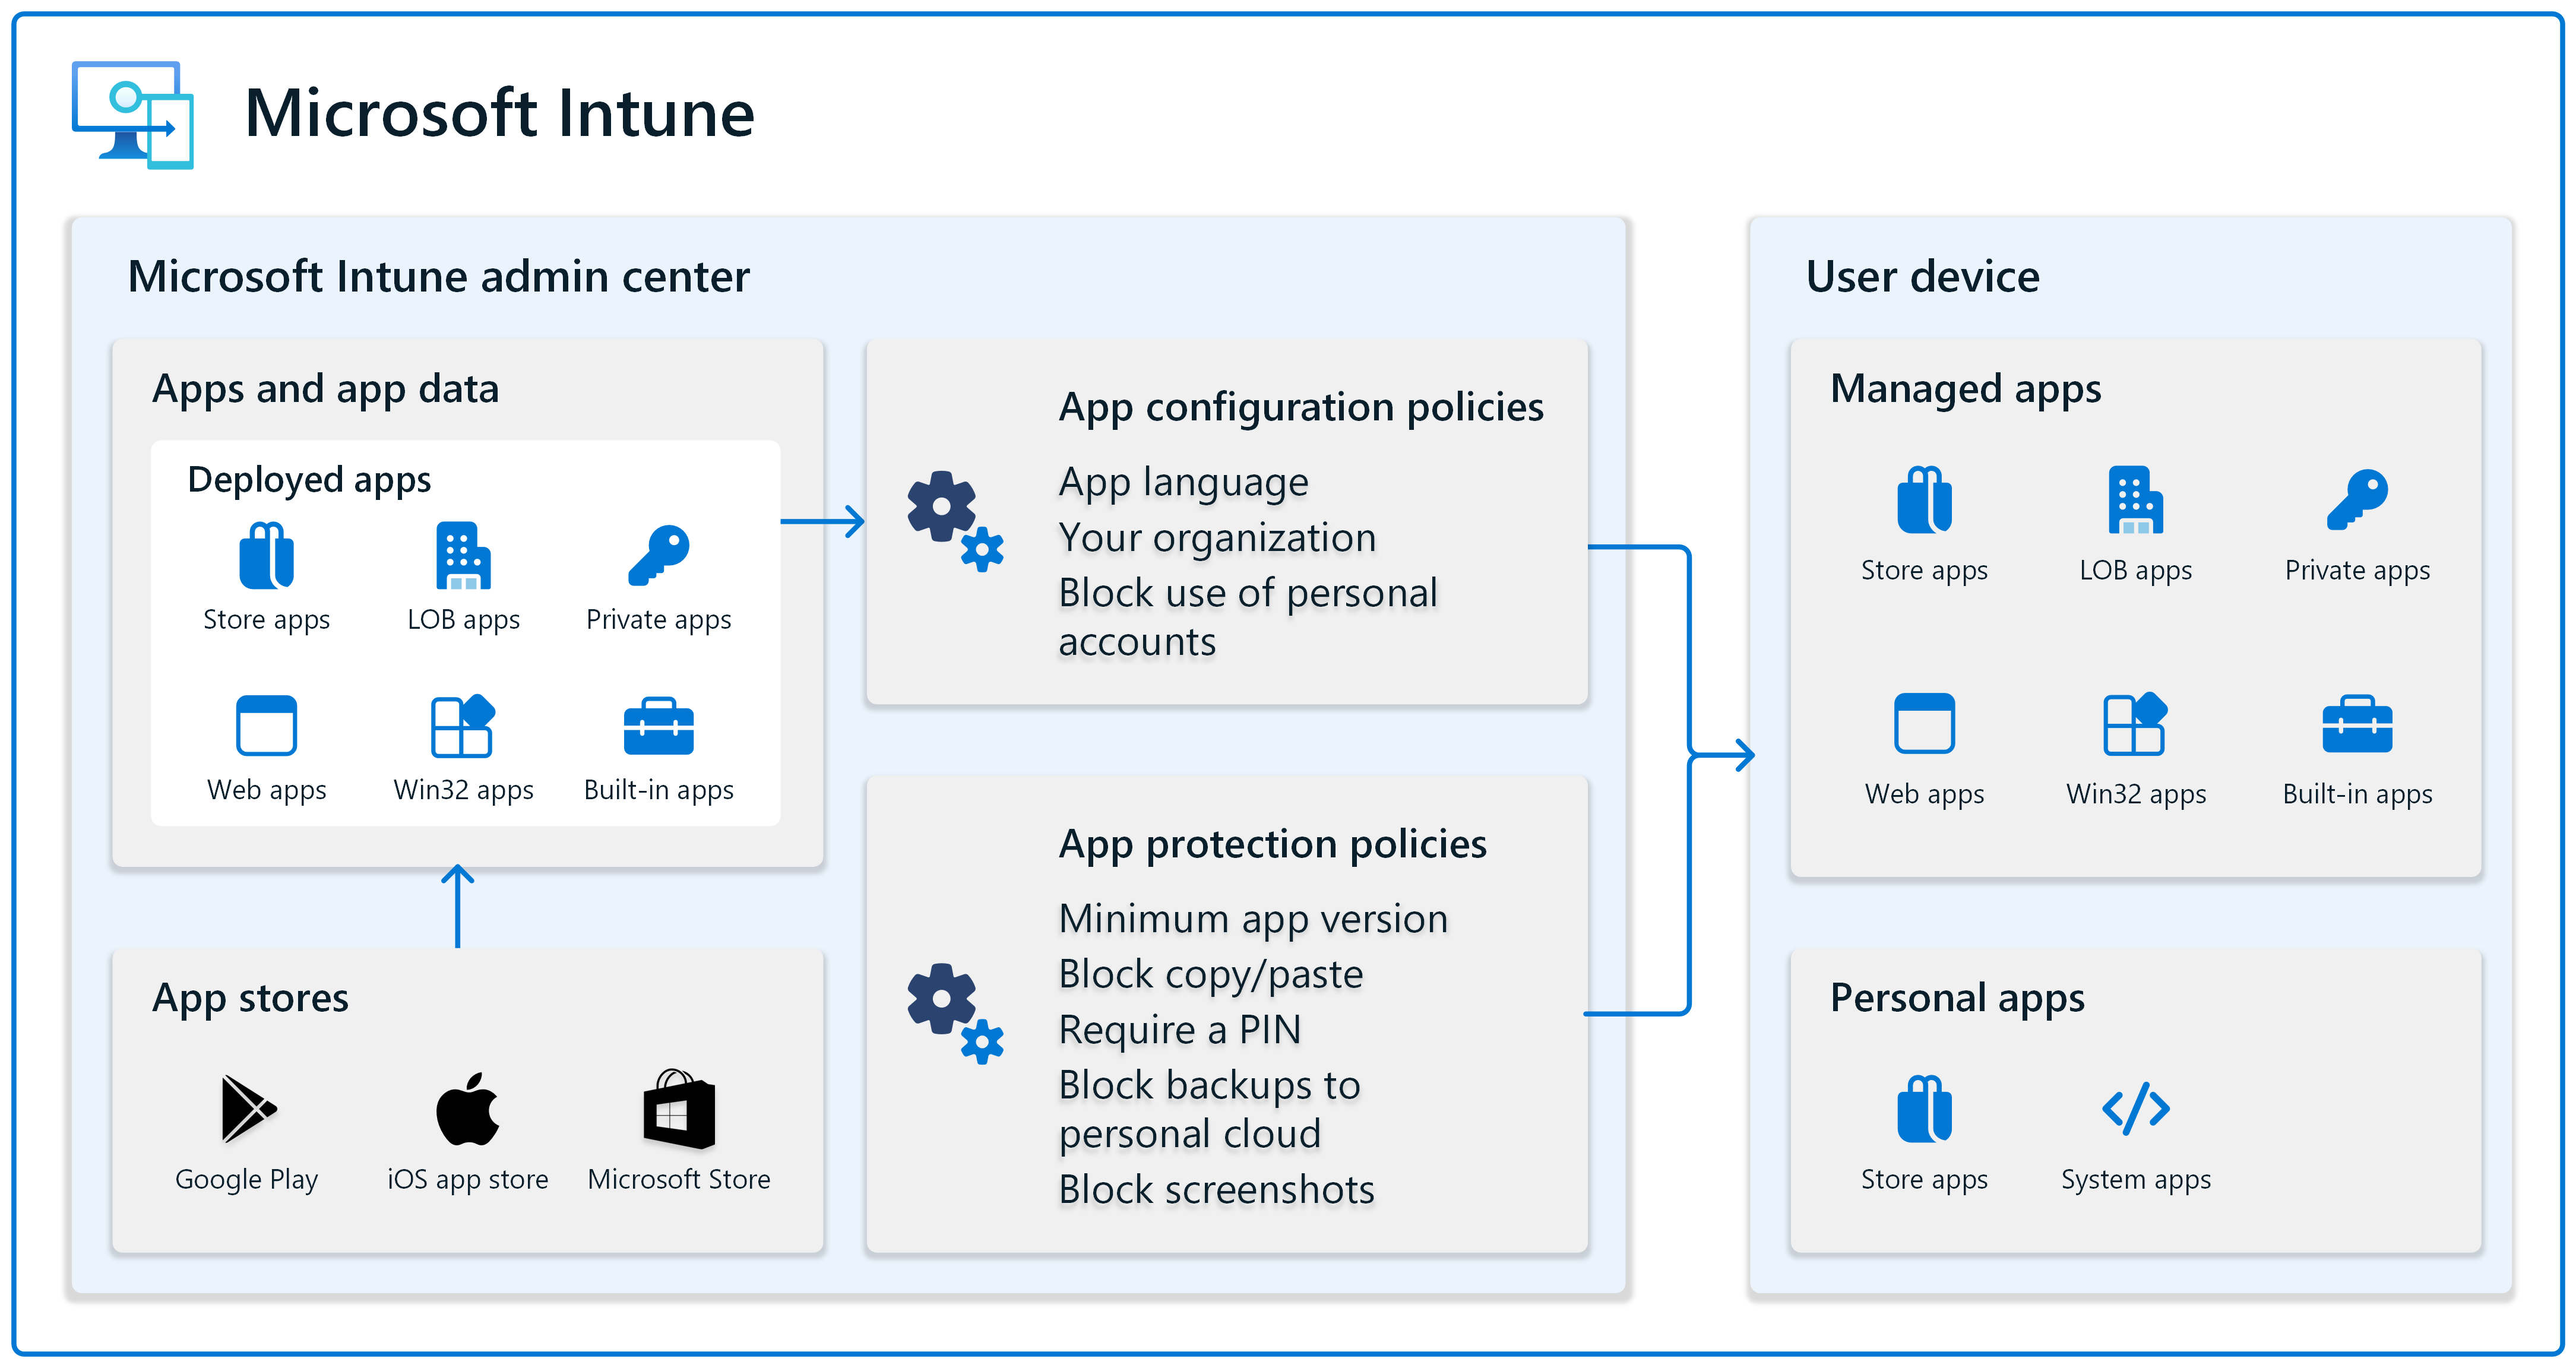 A diagram of Microsoft Intune, illustrating the flow between the Intune admin center and user devices. The diagram includes: Apps and App Data: Depicted with categories such as Deployed Apps (Store apps, LOB apps, Private apps, Web apps, Win32 apps, Built-in apps). App Configuration Policies: Include settings for app language, organizational settings, and blocking the use of personal accounts. App Protection Policies: Enforce minimum app versions, block copy/paste, require a PIN, block backups to personal cloud, and block screenshots. User Devices: Showcasing Managed Apps (same categories as deployed apps) and Personal Apps (Store apps and System apps). App Stores: Icons for Google Play, iOS App Store, and Microsoft Store. The flow illustrates how apps and policies are managed and deployed from the Intune admin center to user devices.